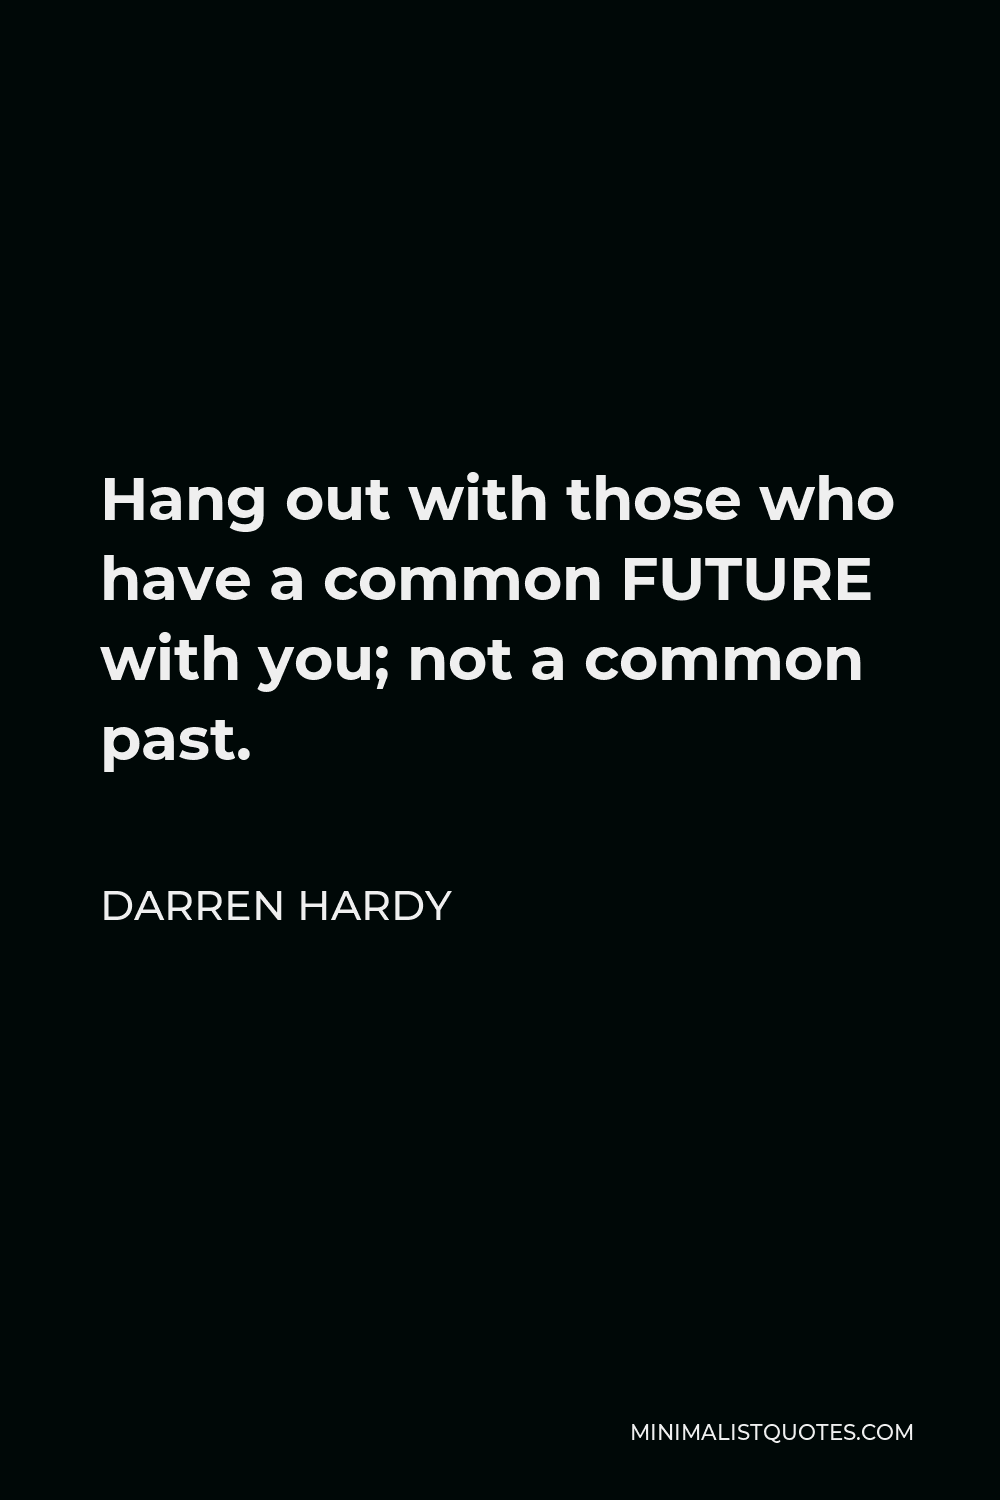 Darren Hardy Quote - Hang out with those who have a common FUTURE with you; not a common past.